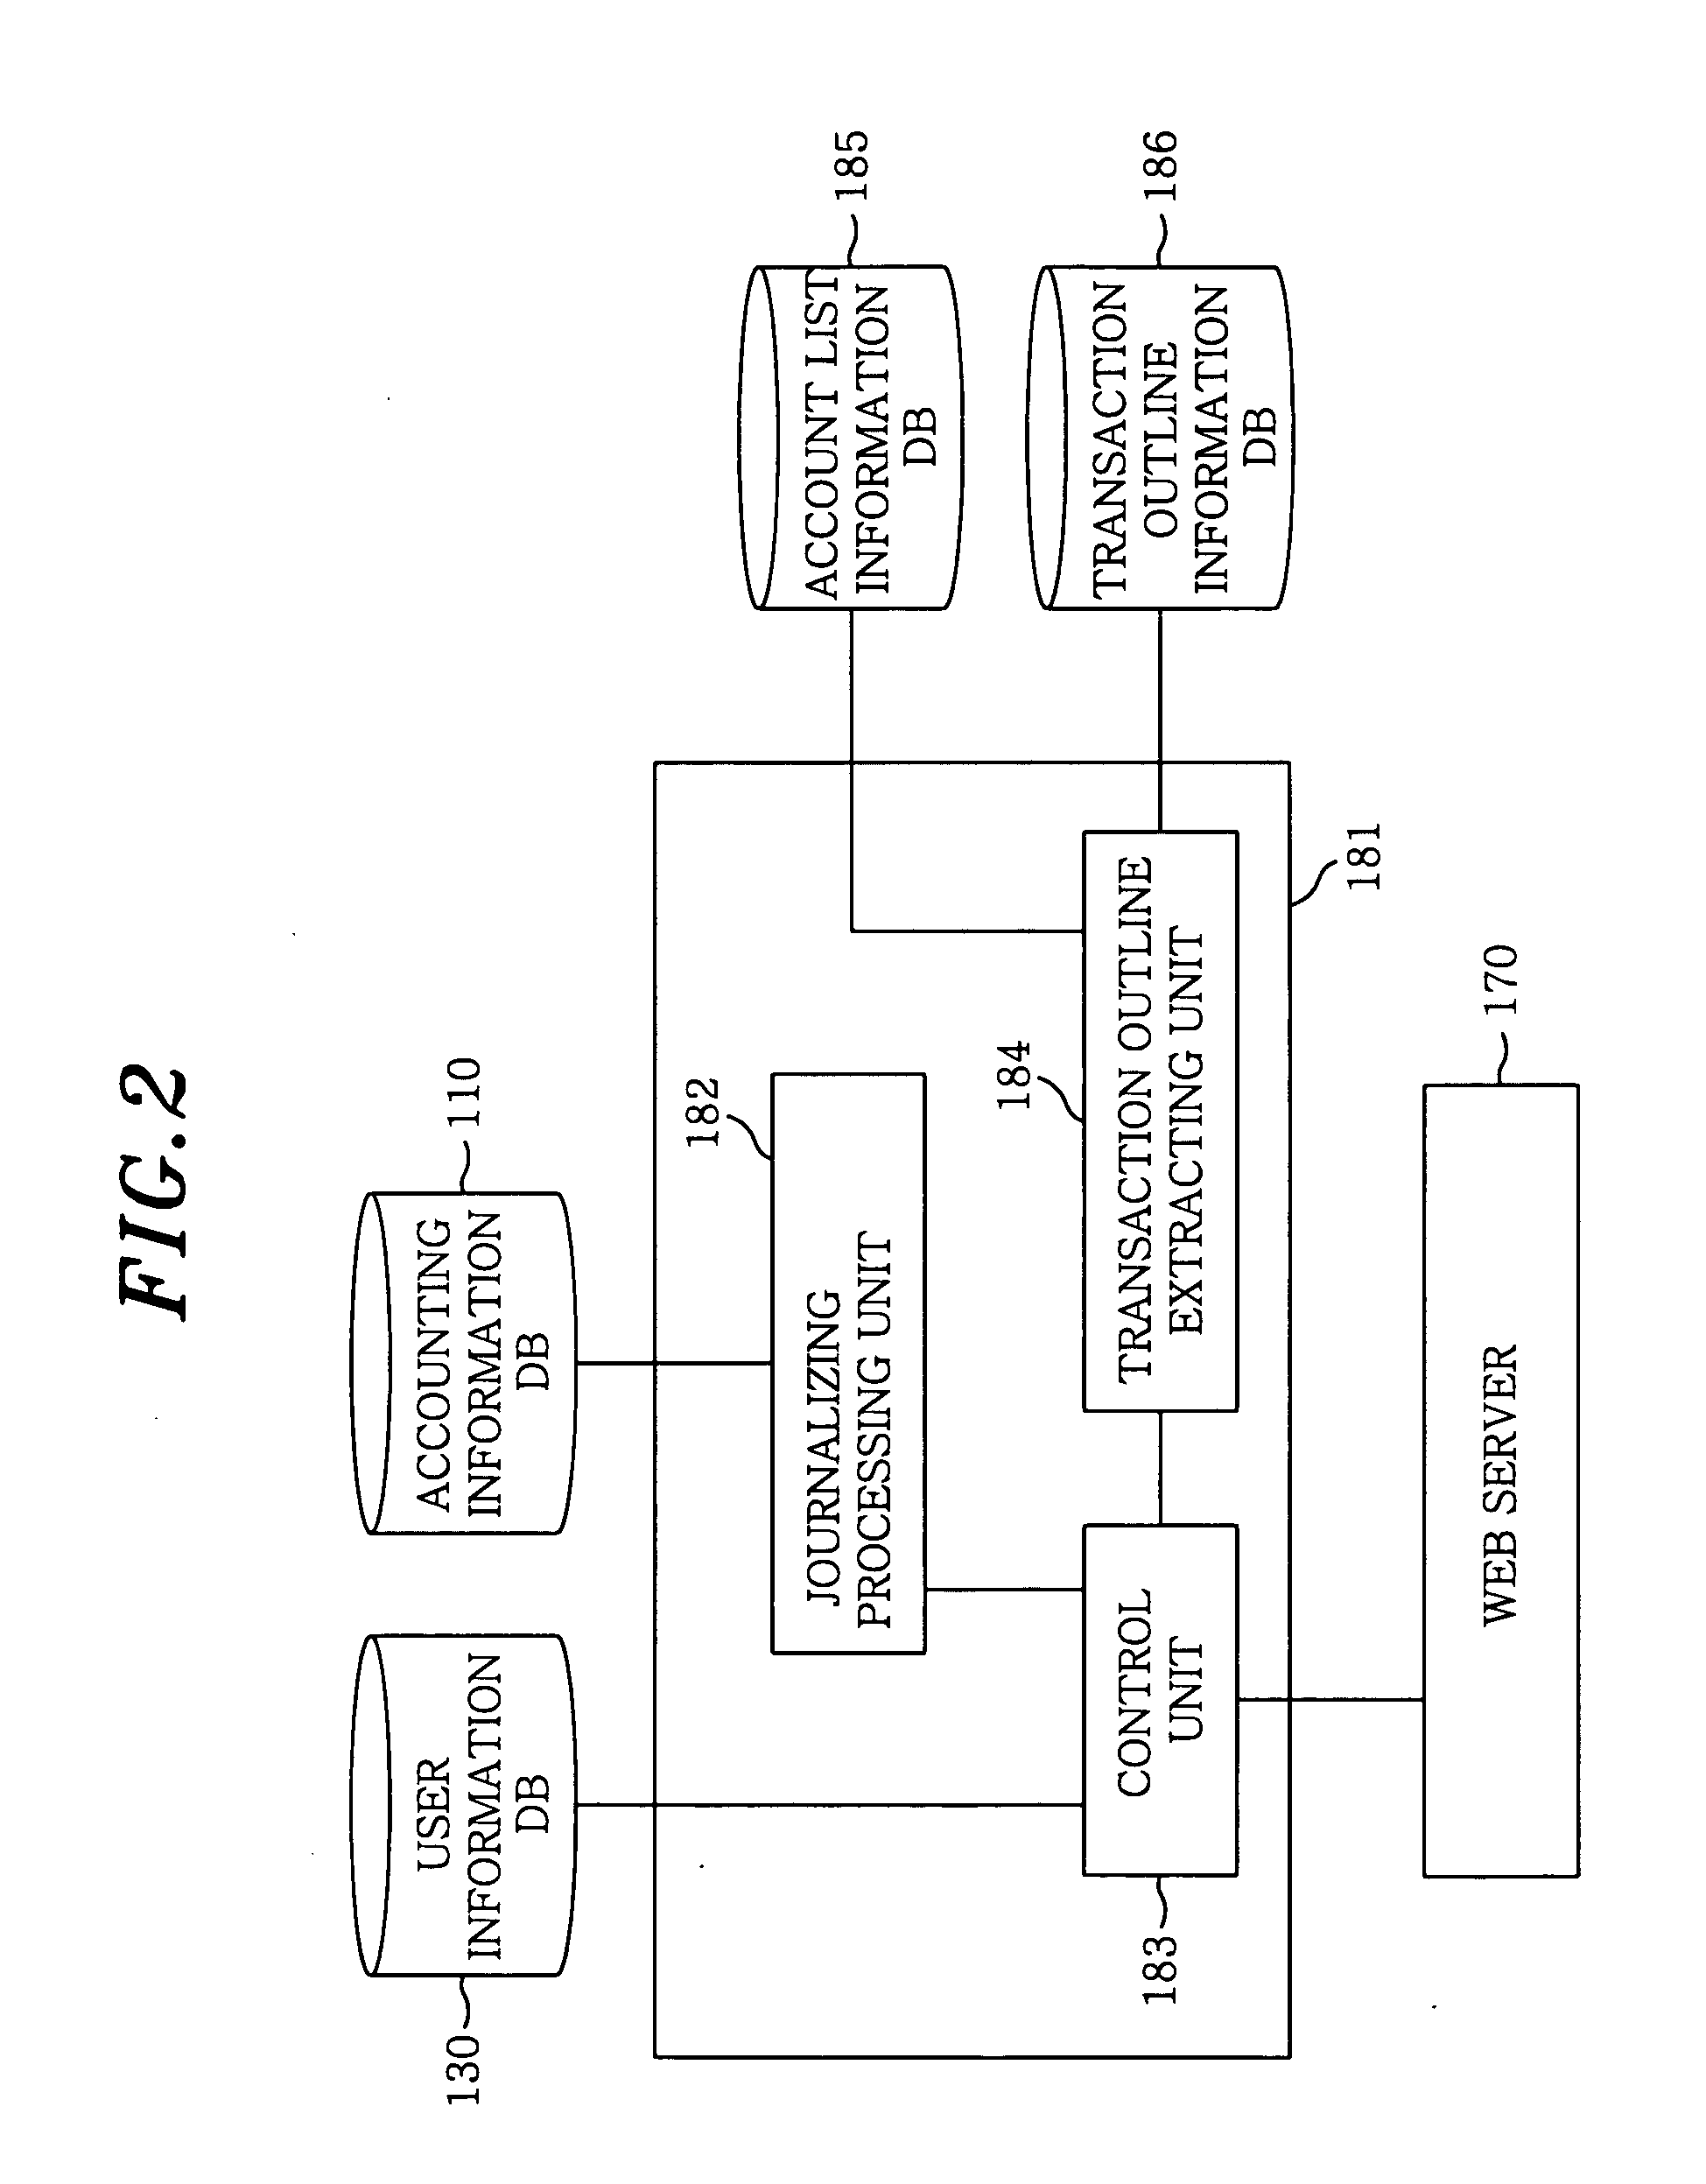 Automatic journalizing method and system